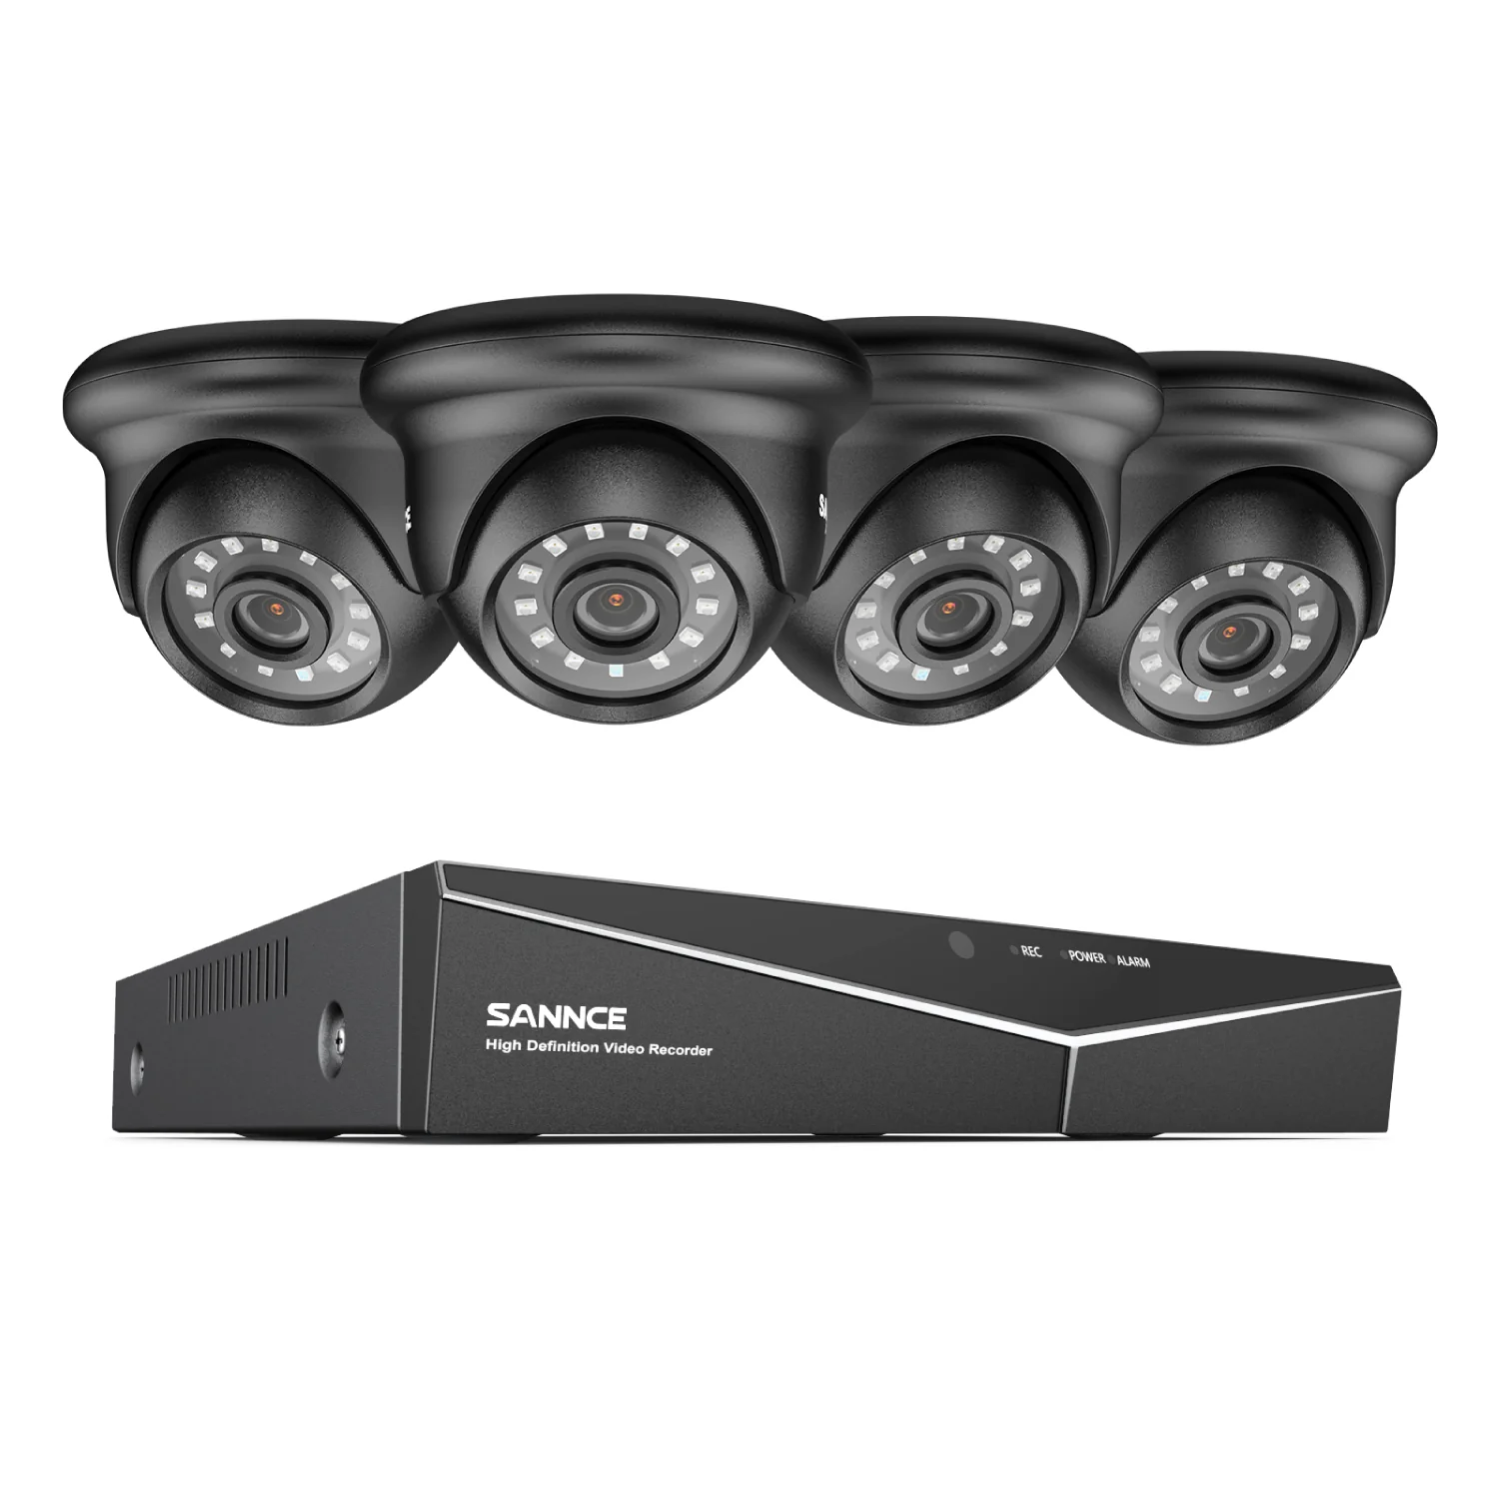 SANNCE 8-Channel 1080p Wired Security Camera System: Hybrid DVR + x4 2MP Turret Cameras w/ Smart Motion Detection & 24/7 Recording + Free Shipping $95